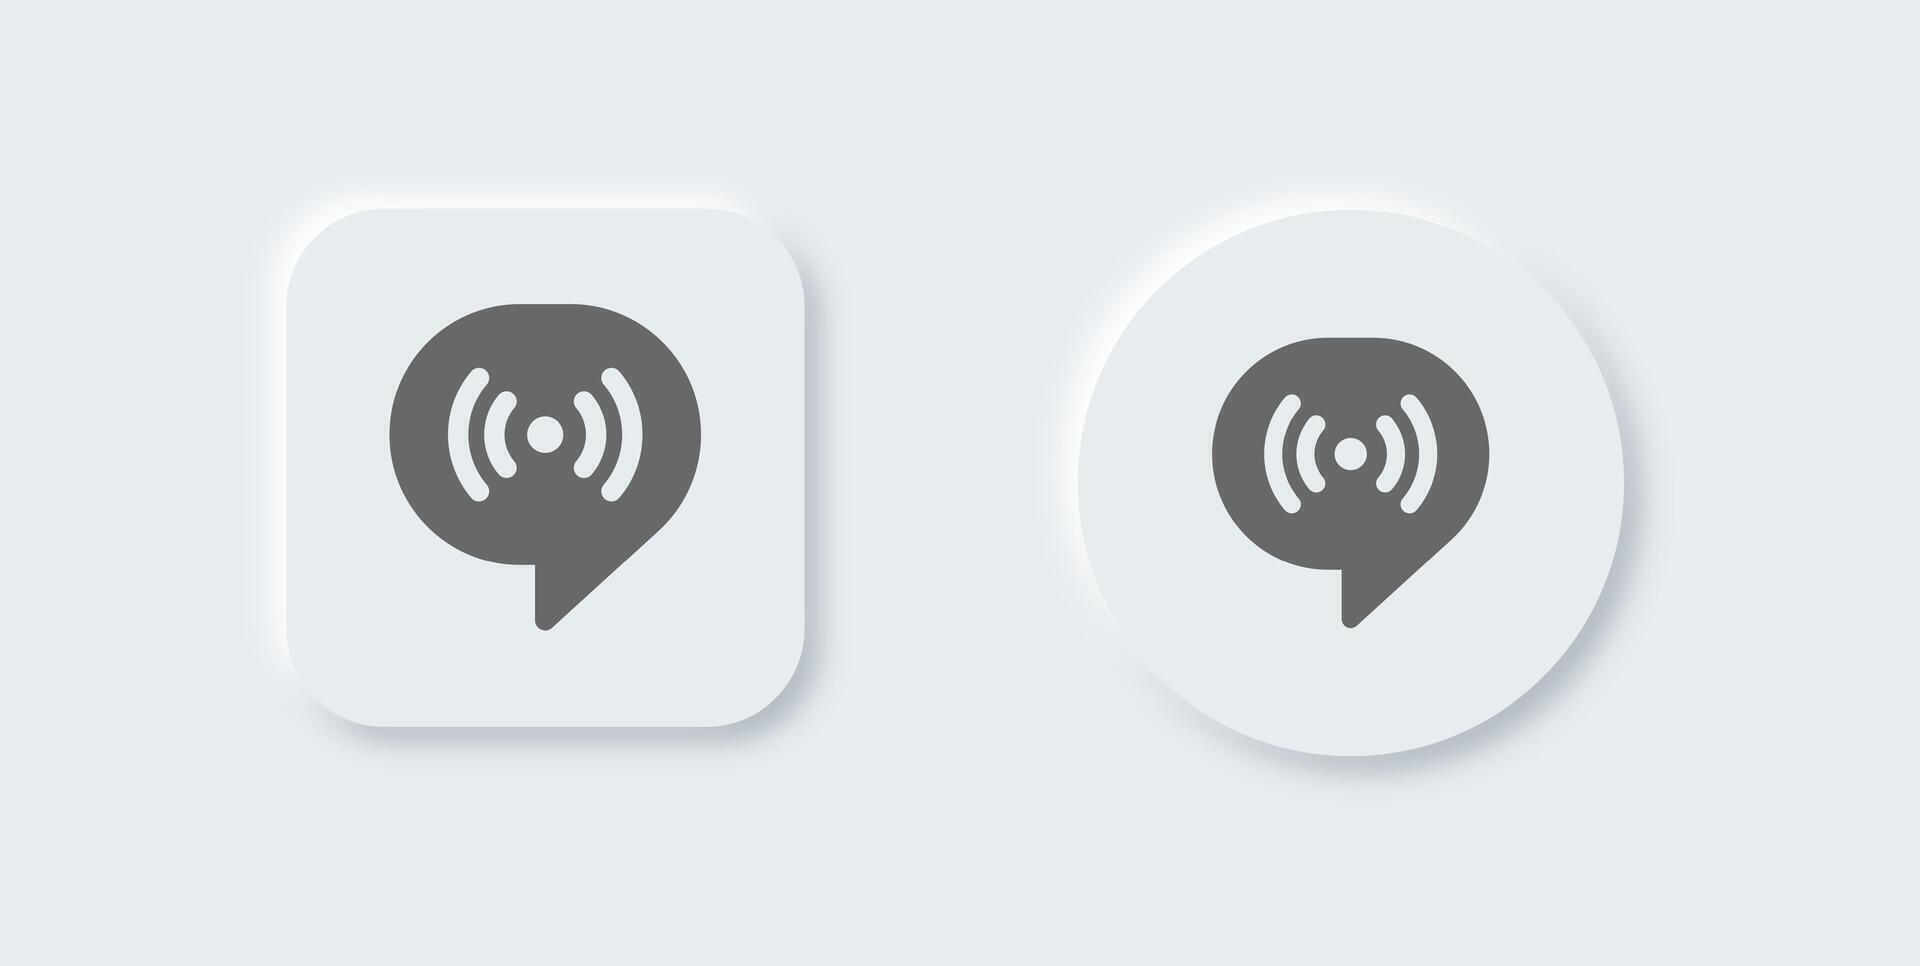 Broadcast channel solid icon in neomorphic design style. Chat group signs vector illustration.